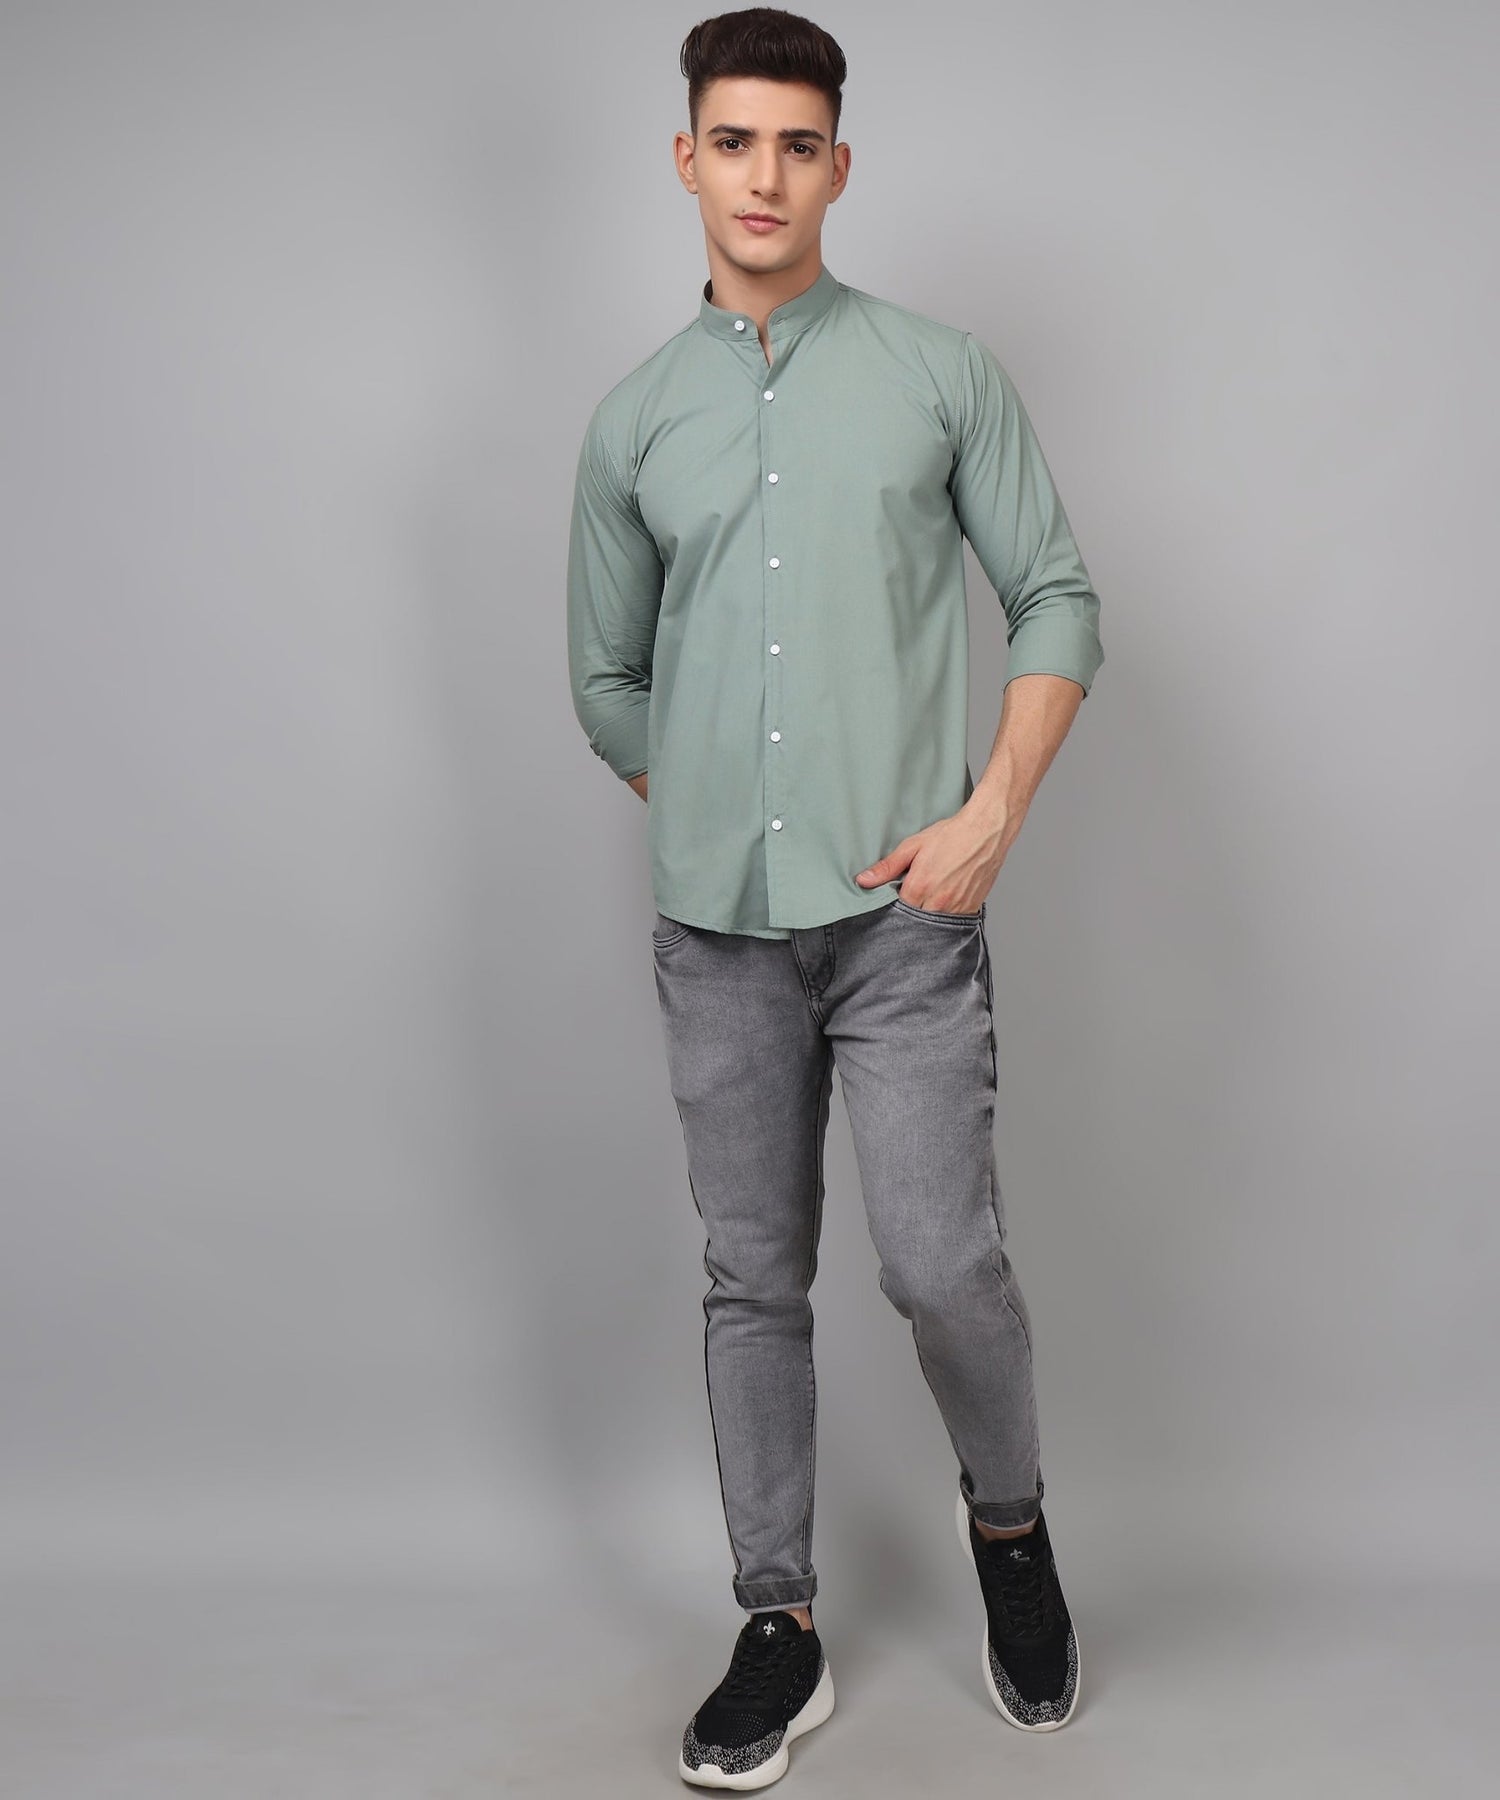 How Should a Man Wear a Casual Shirt? - TryBuy® USA🇺🇸